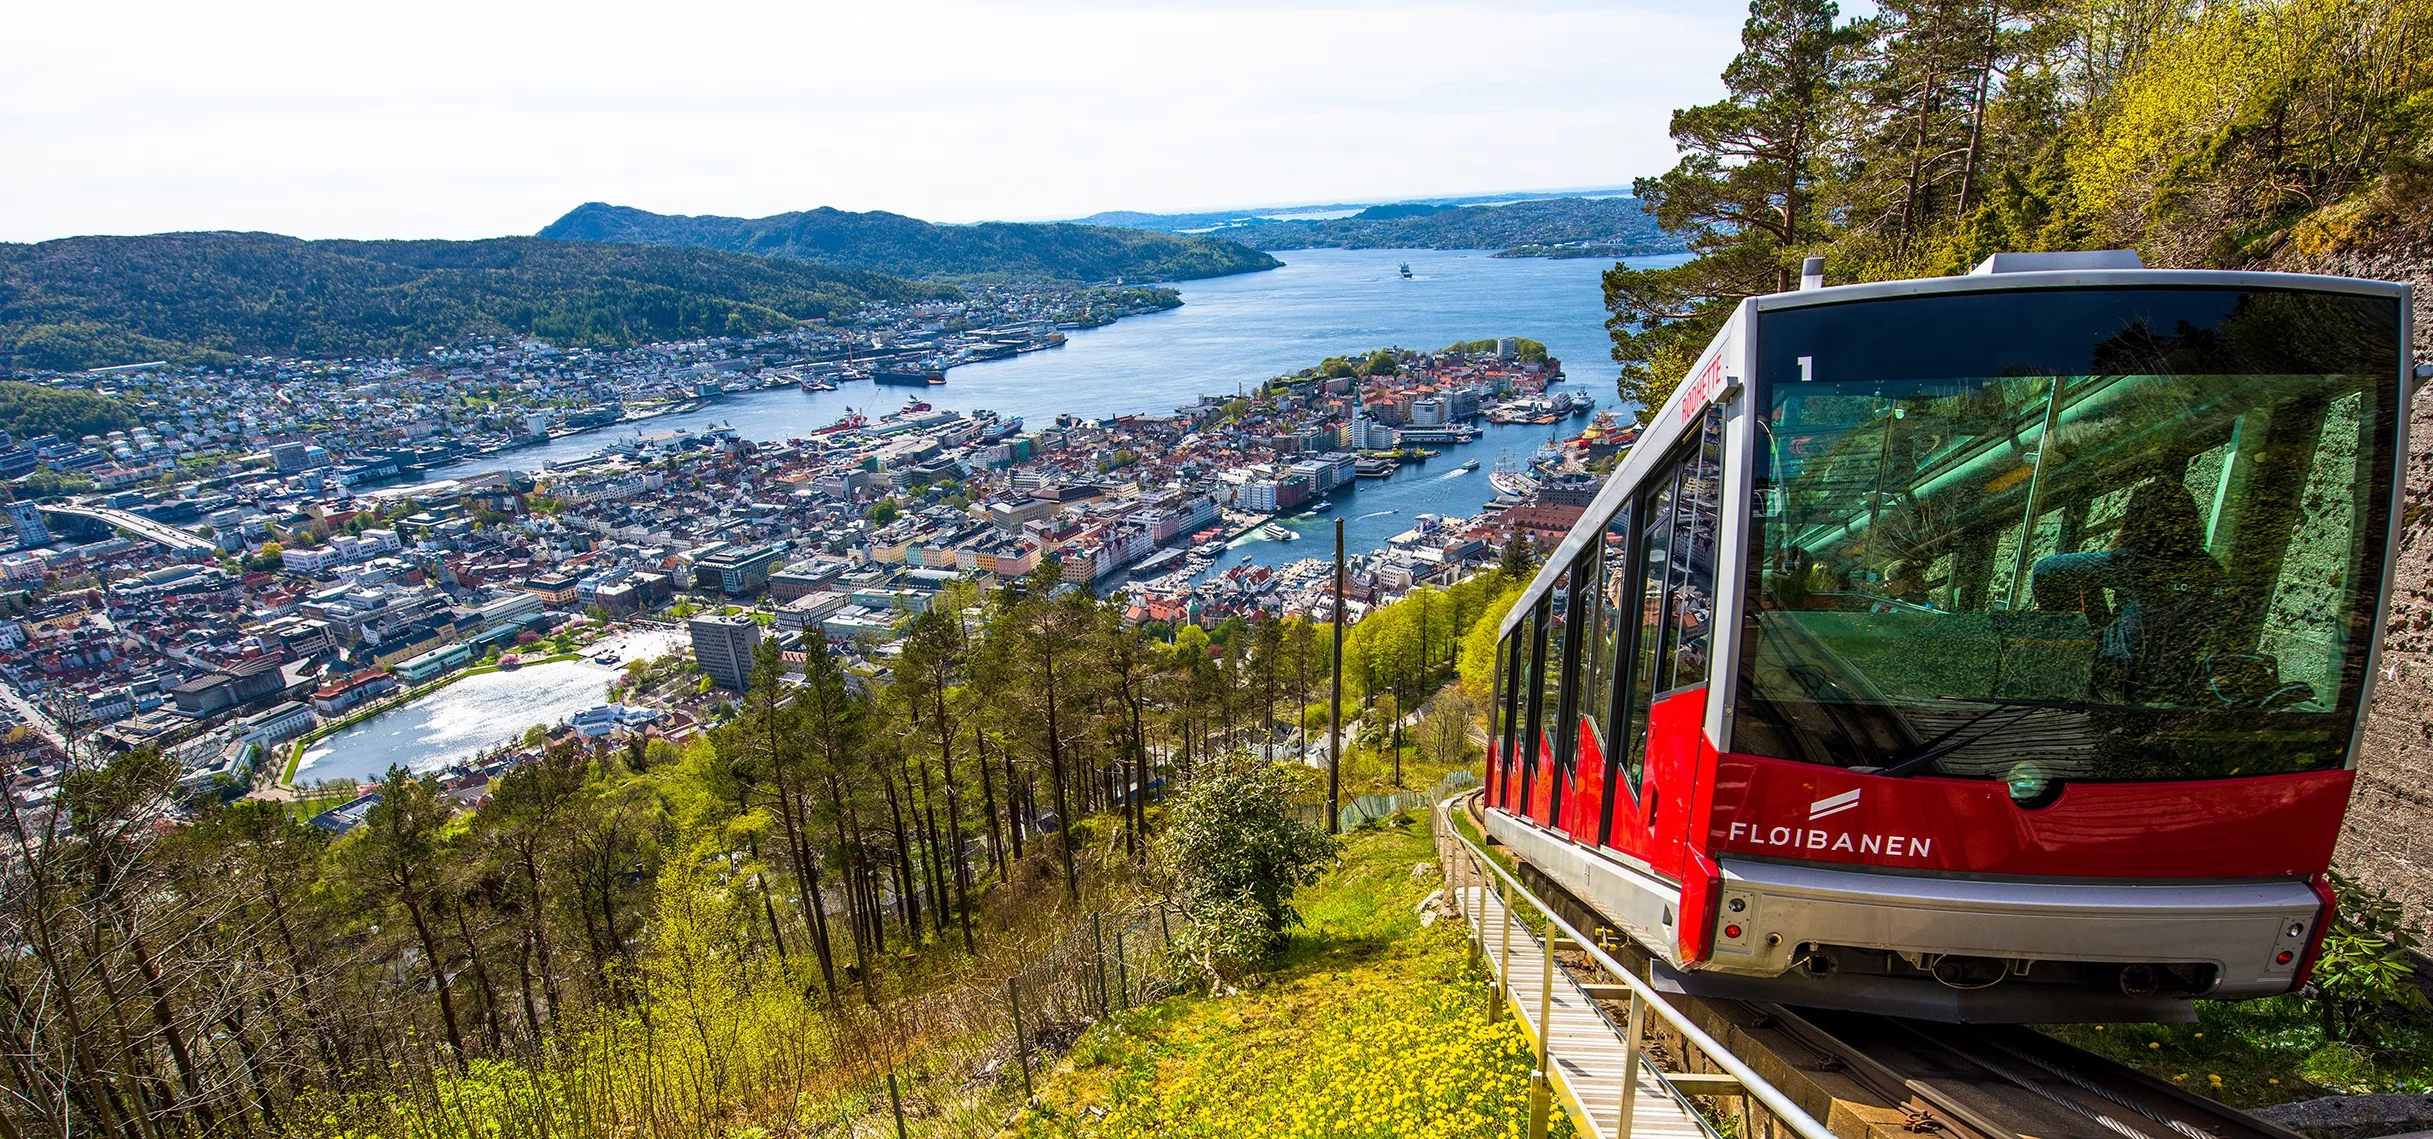 Floibanen in Norway, Europe | Cable Cars - Rated 3.7